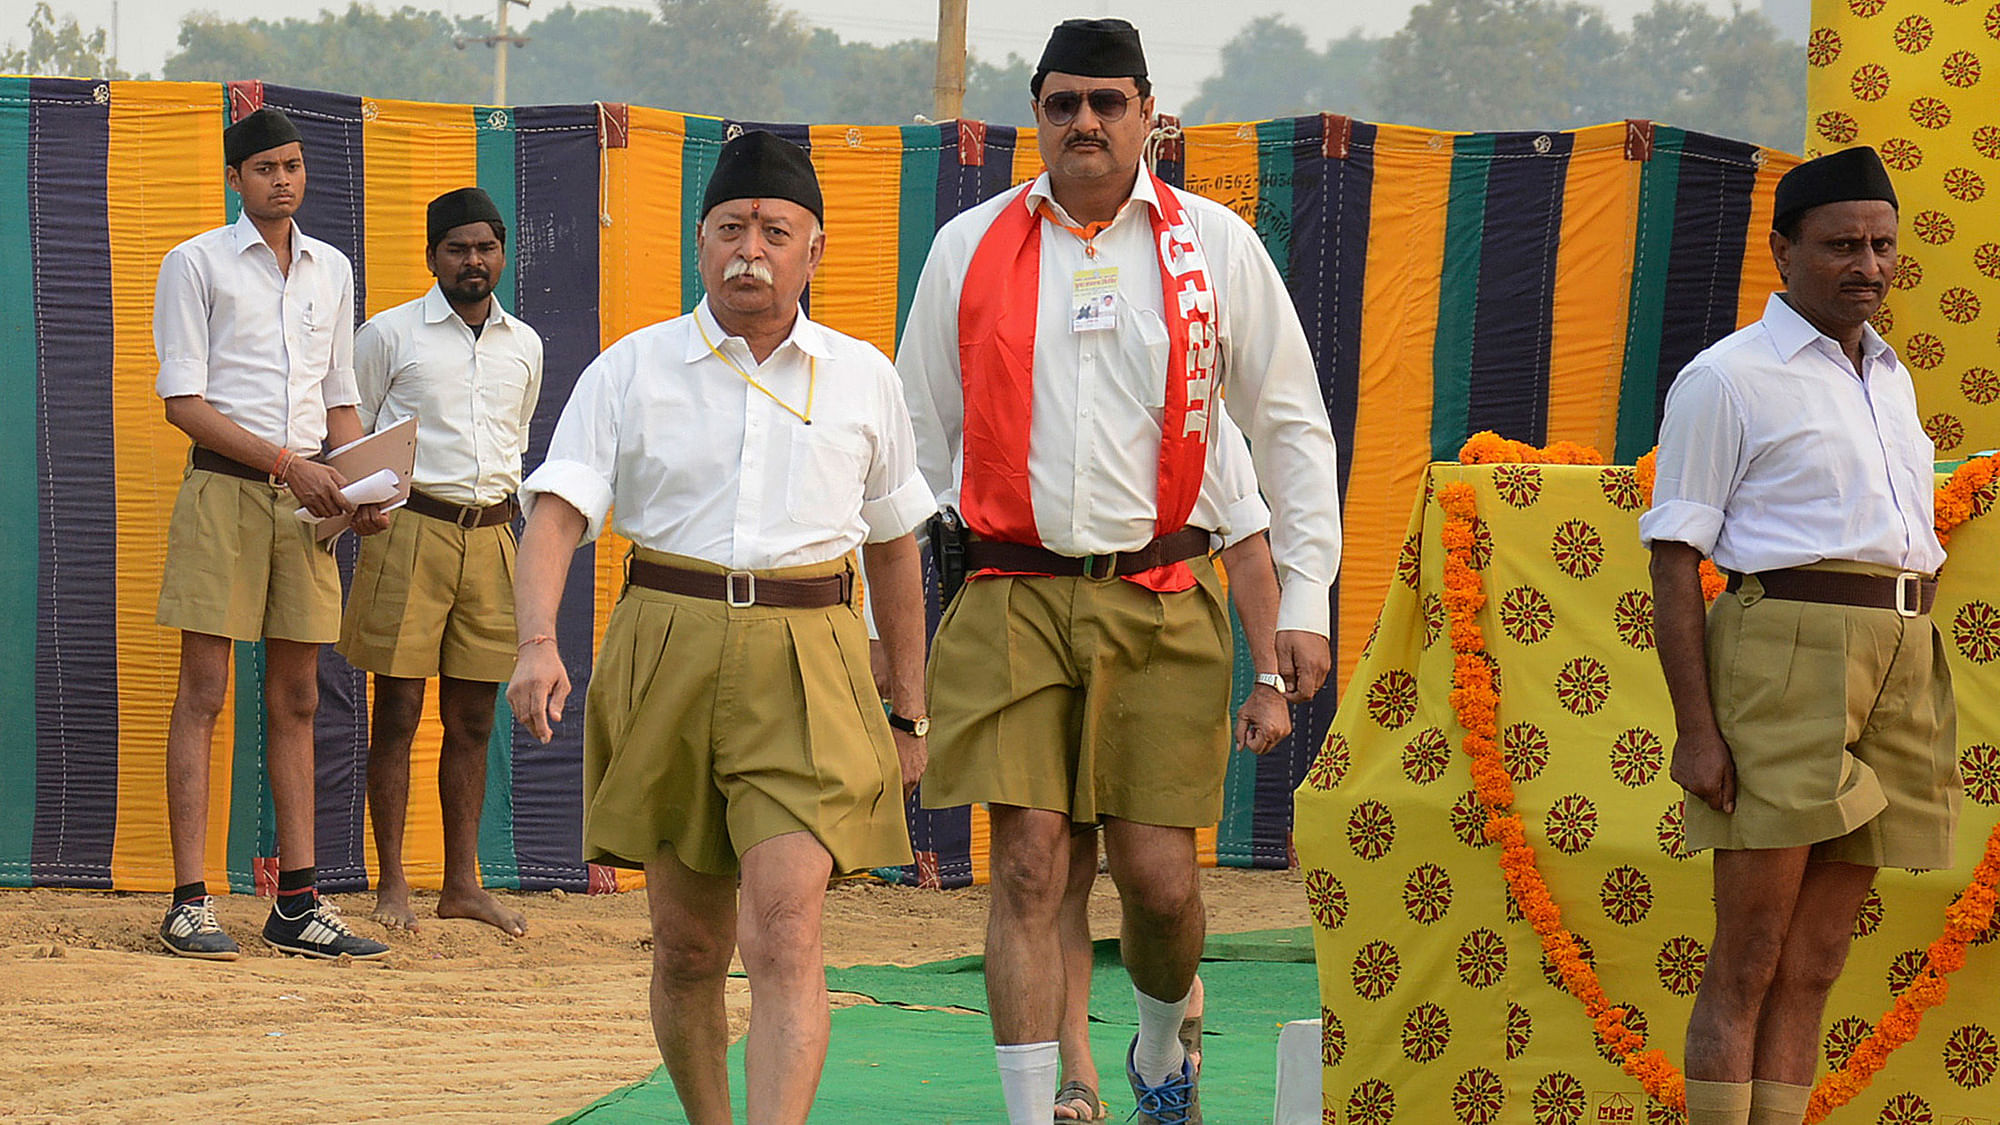 File photo of RSS Chief Mohan Bhagwat. (Photo: Reuters)